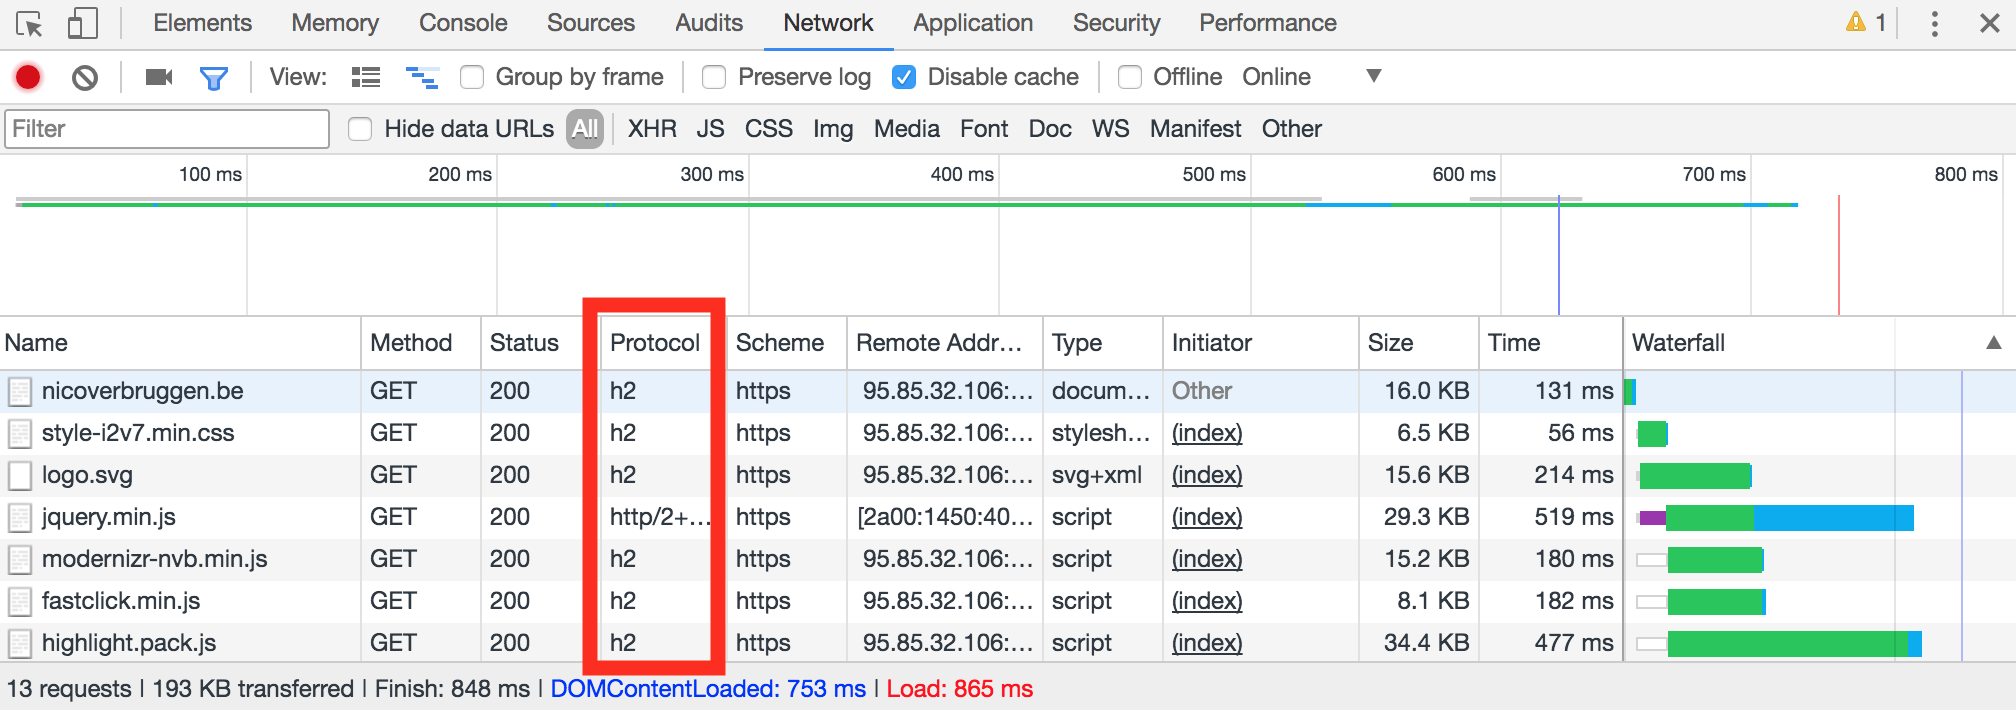 As you can see, Google Chrome clearly indicates the HTTP/2 protocol in the Network request list.